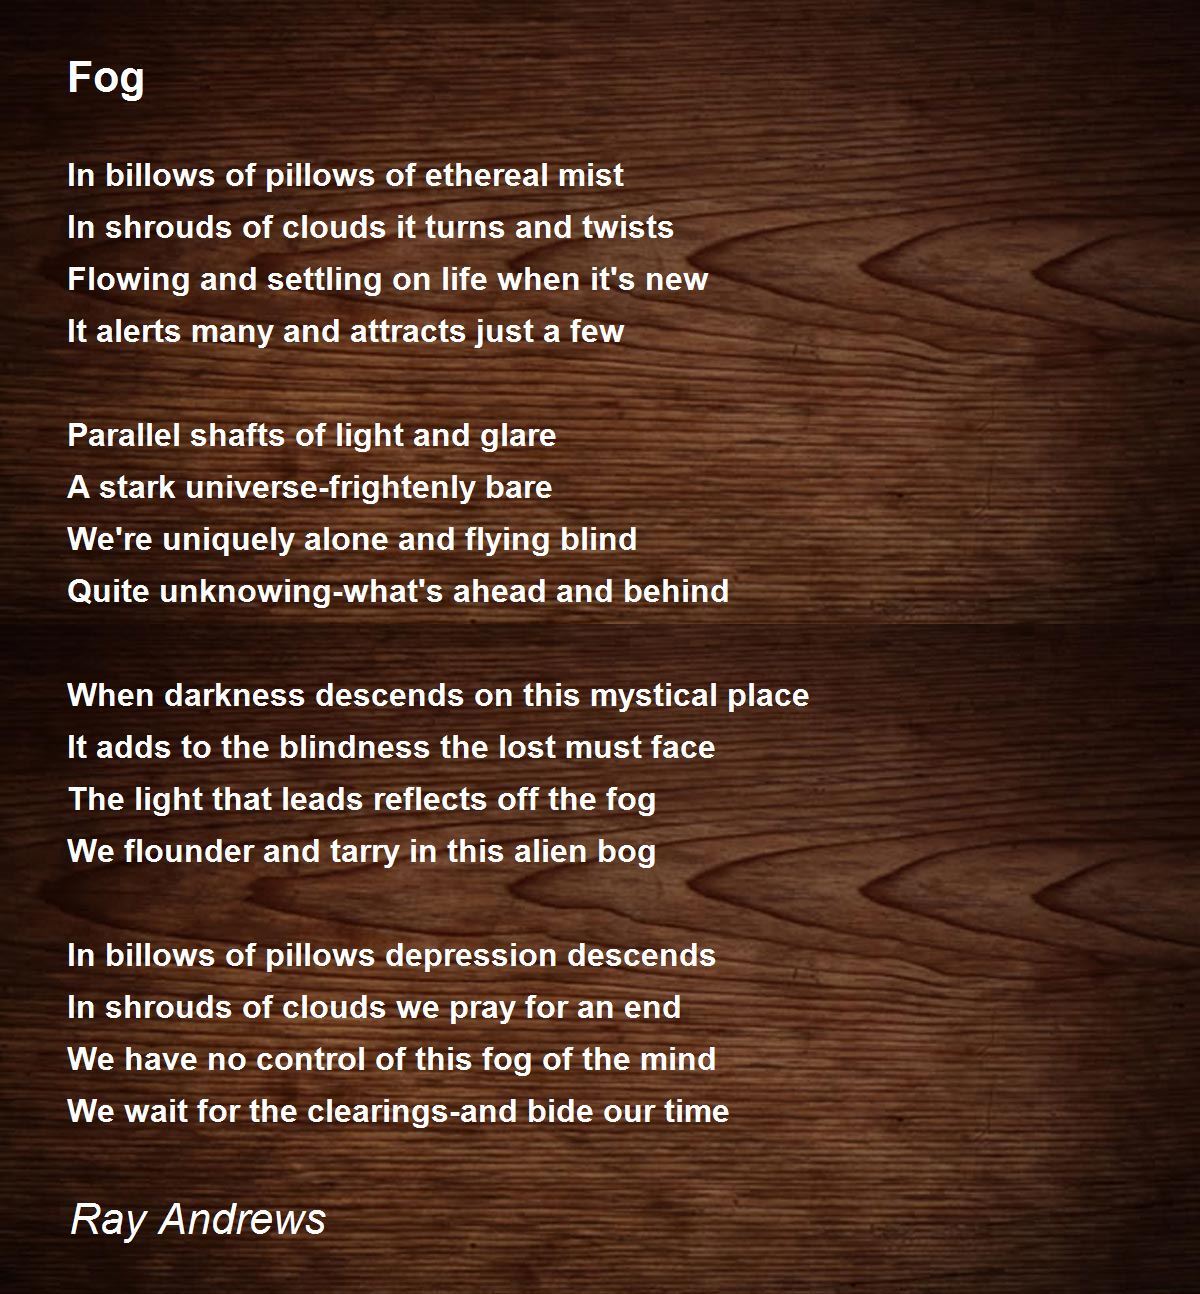 creative writing examples of fog